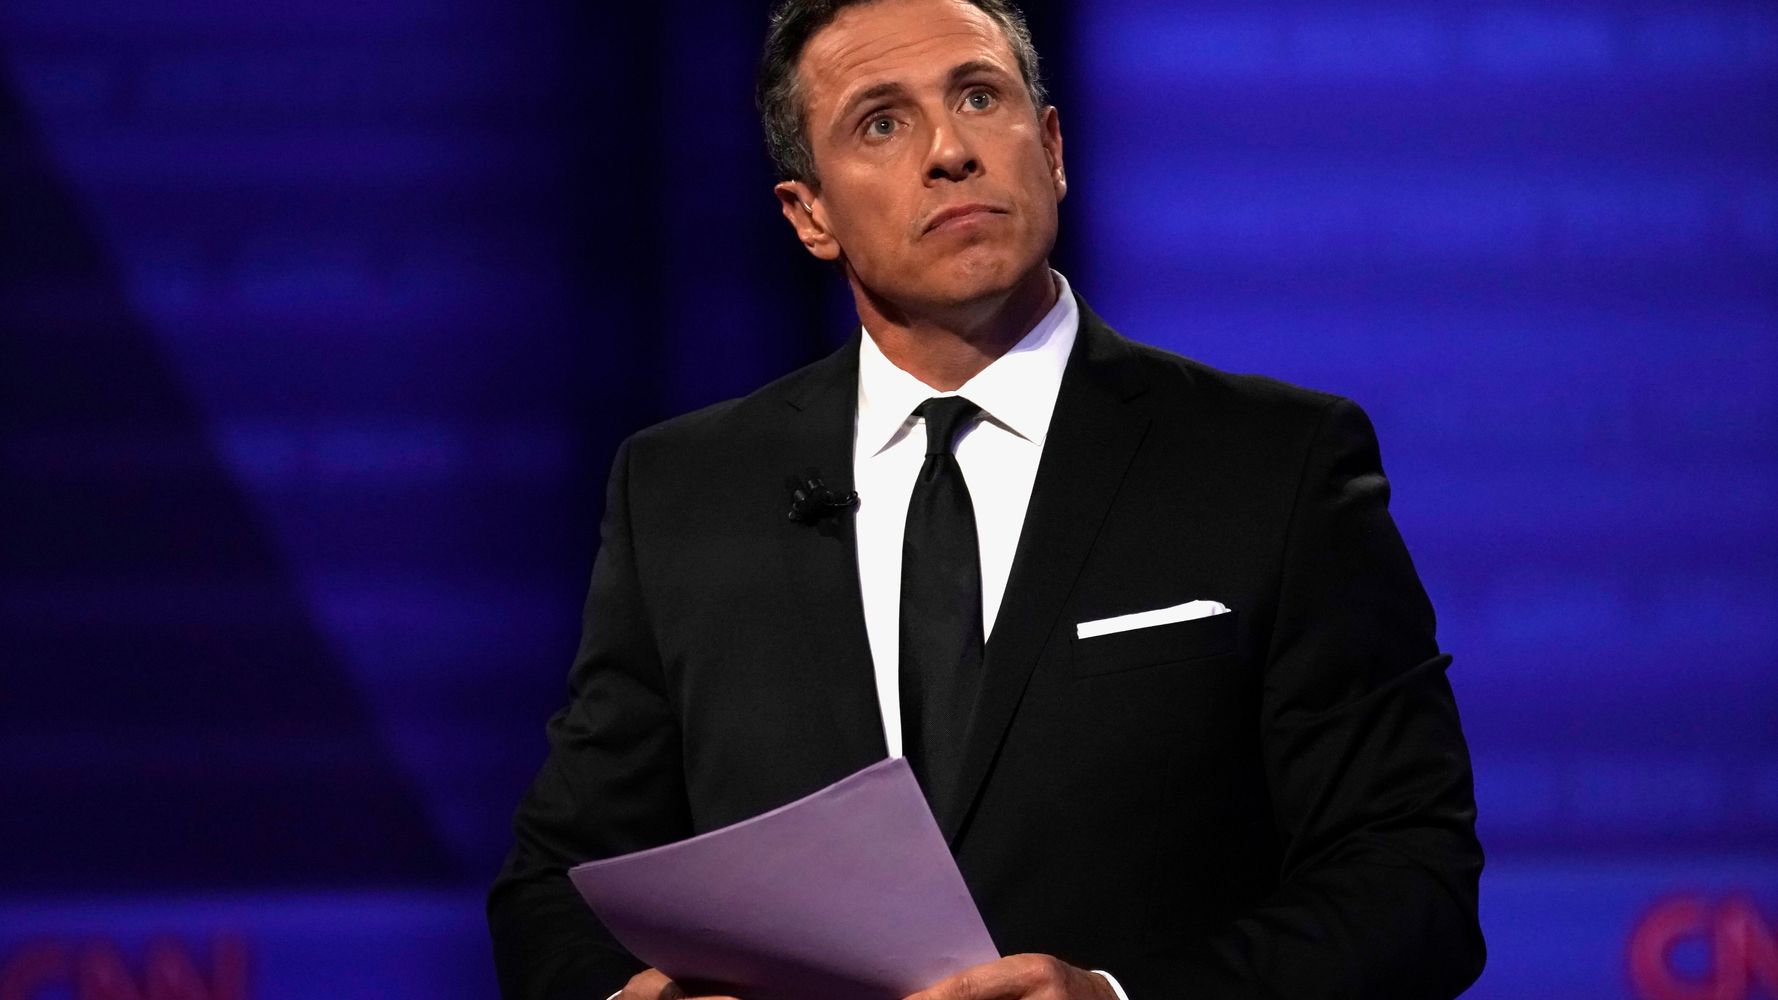 Chris Cuomo's Book Pulled By Publisher After His Firing From CNN | HuffPost Latest News